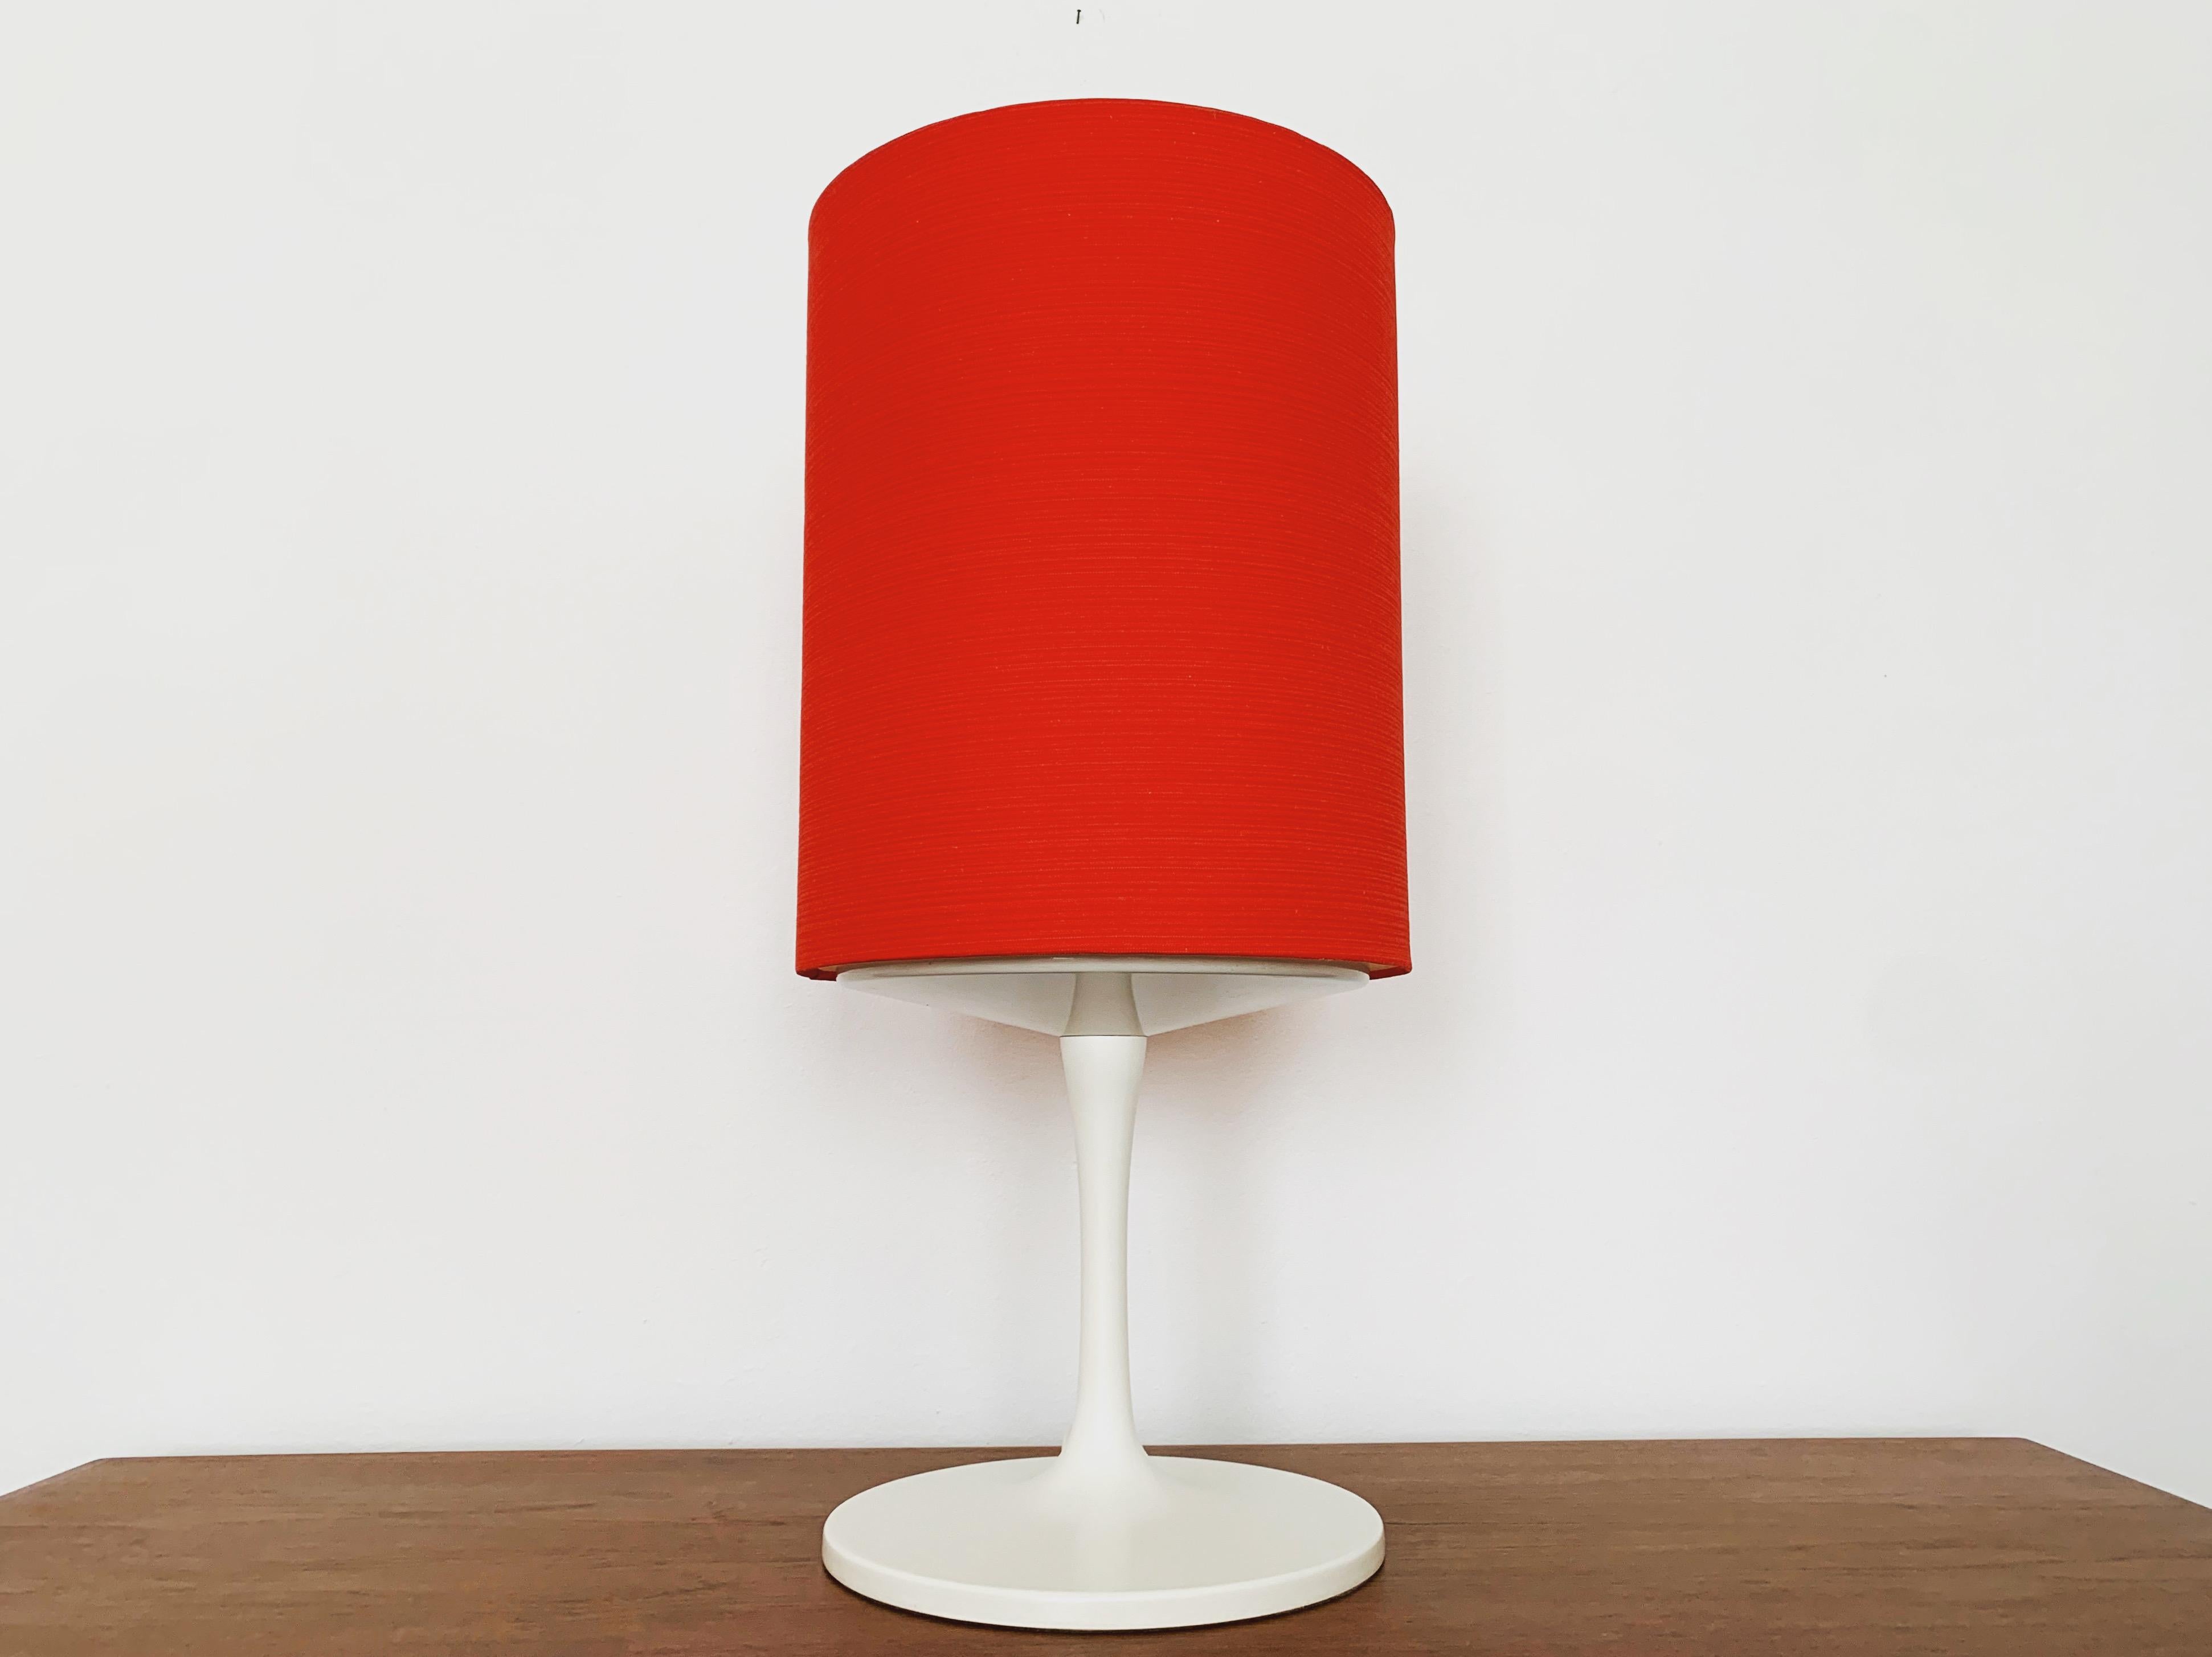 Large and beautiful table lamp from the 1970s.
Impressive design and very high-quality workmanship.
The lighting effect of the lamp is extremely beautiful.

Manufacturer: Staff

Condition:

Very good vintage condition with slight signs of wear